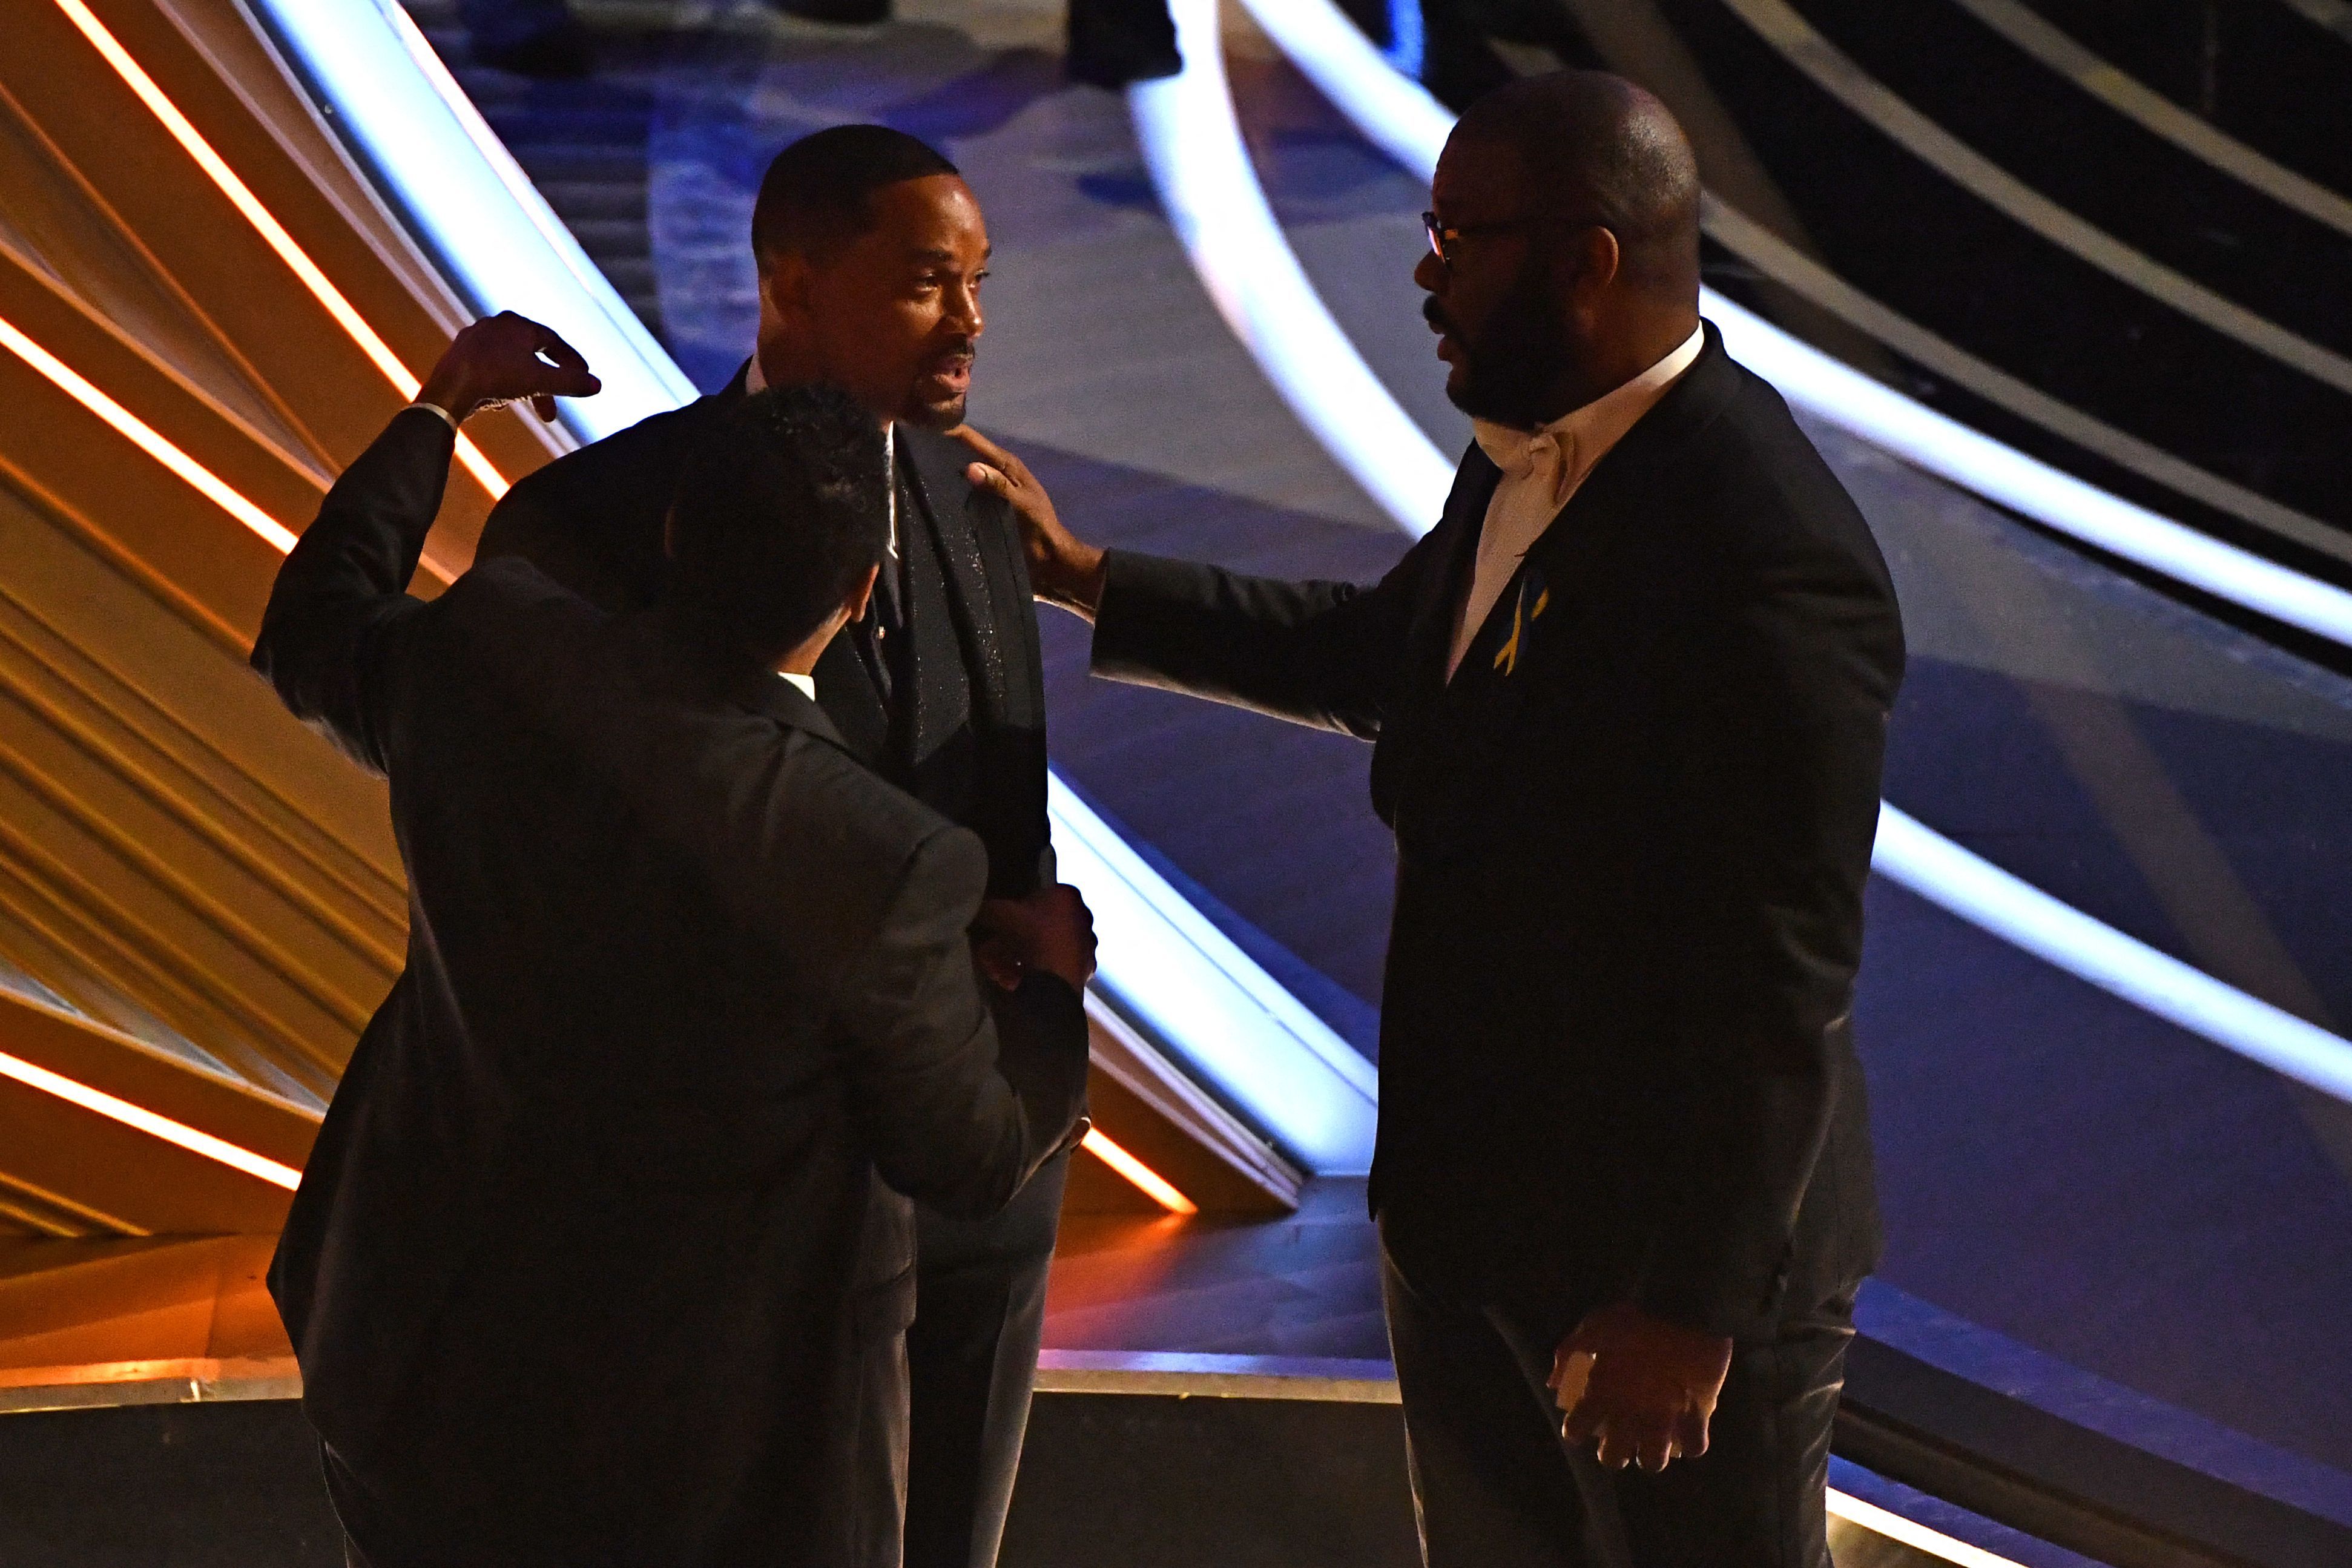 Will Smith appeared to hit Chris Rock at the Oscars.